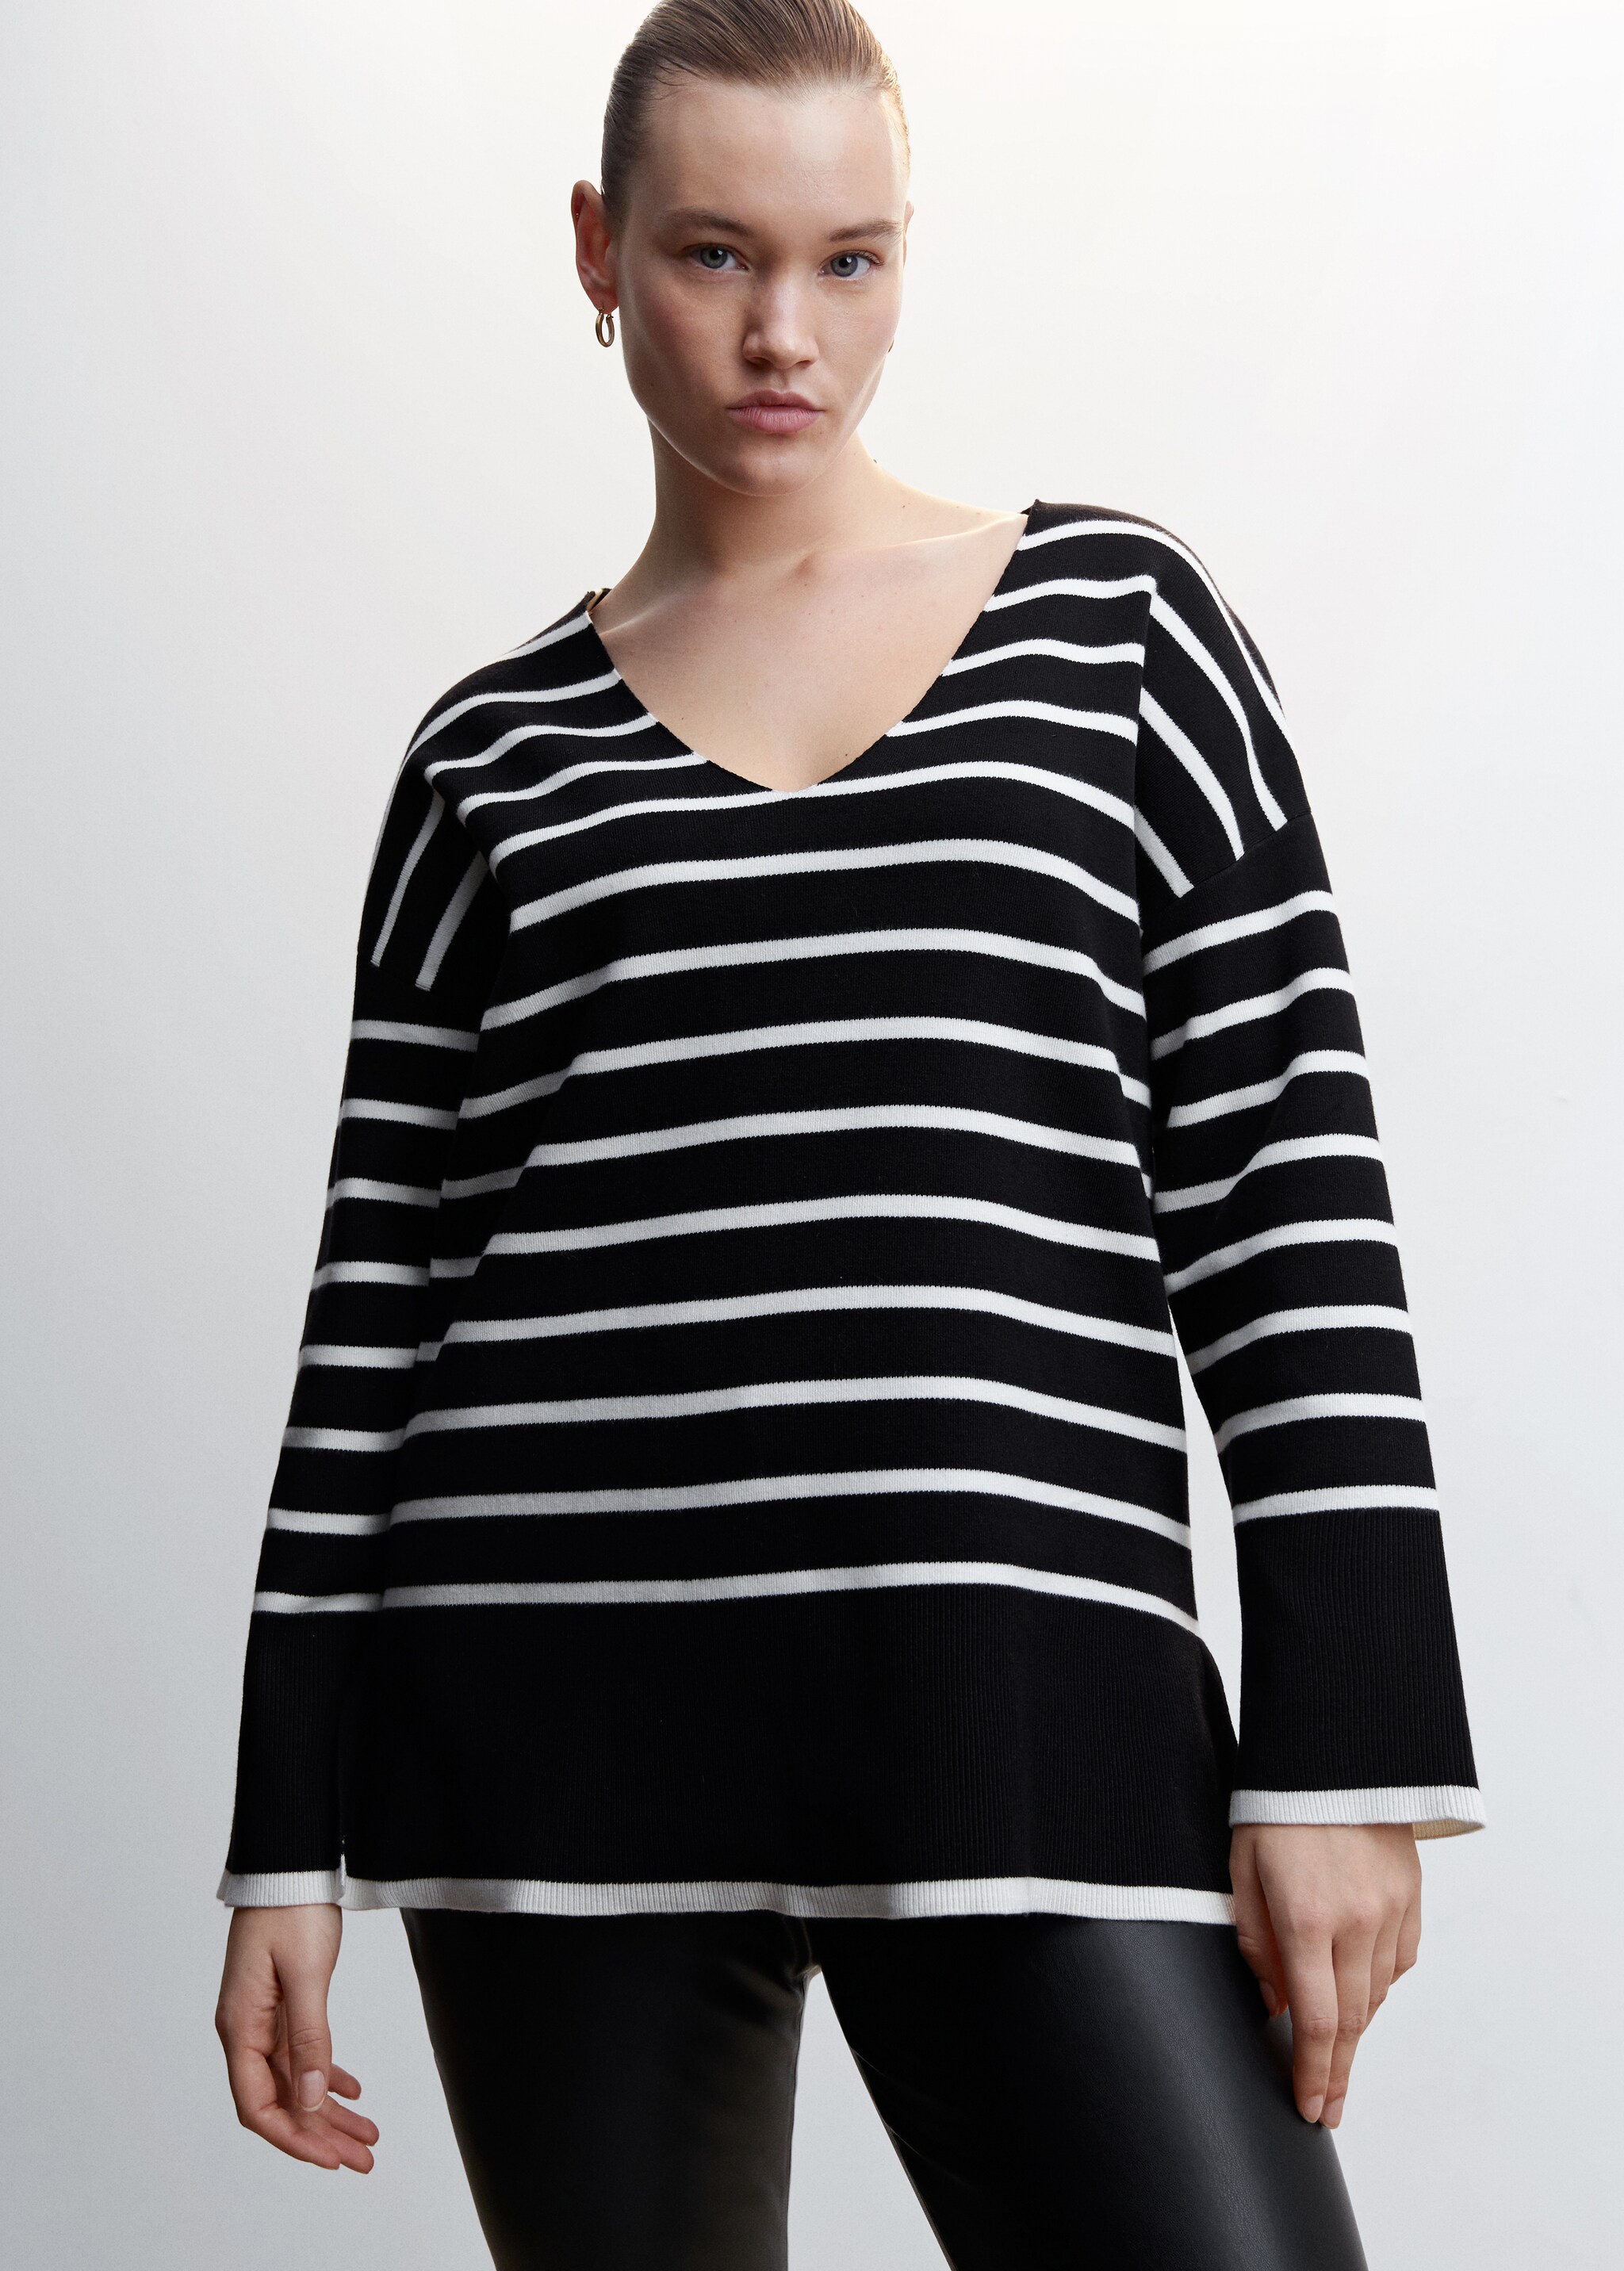 Oversized striped sweater - Details of the article 5